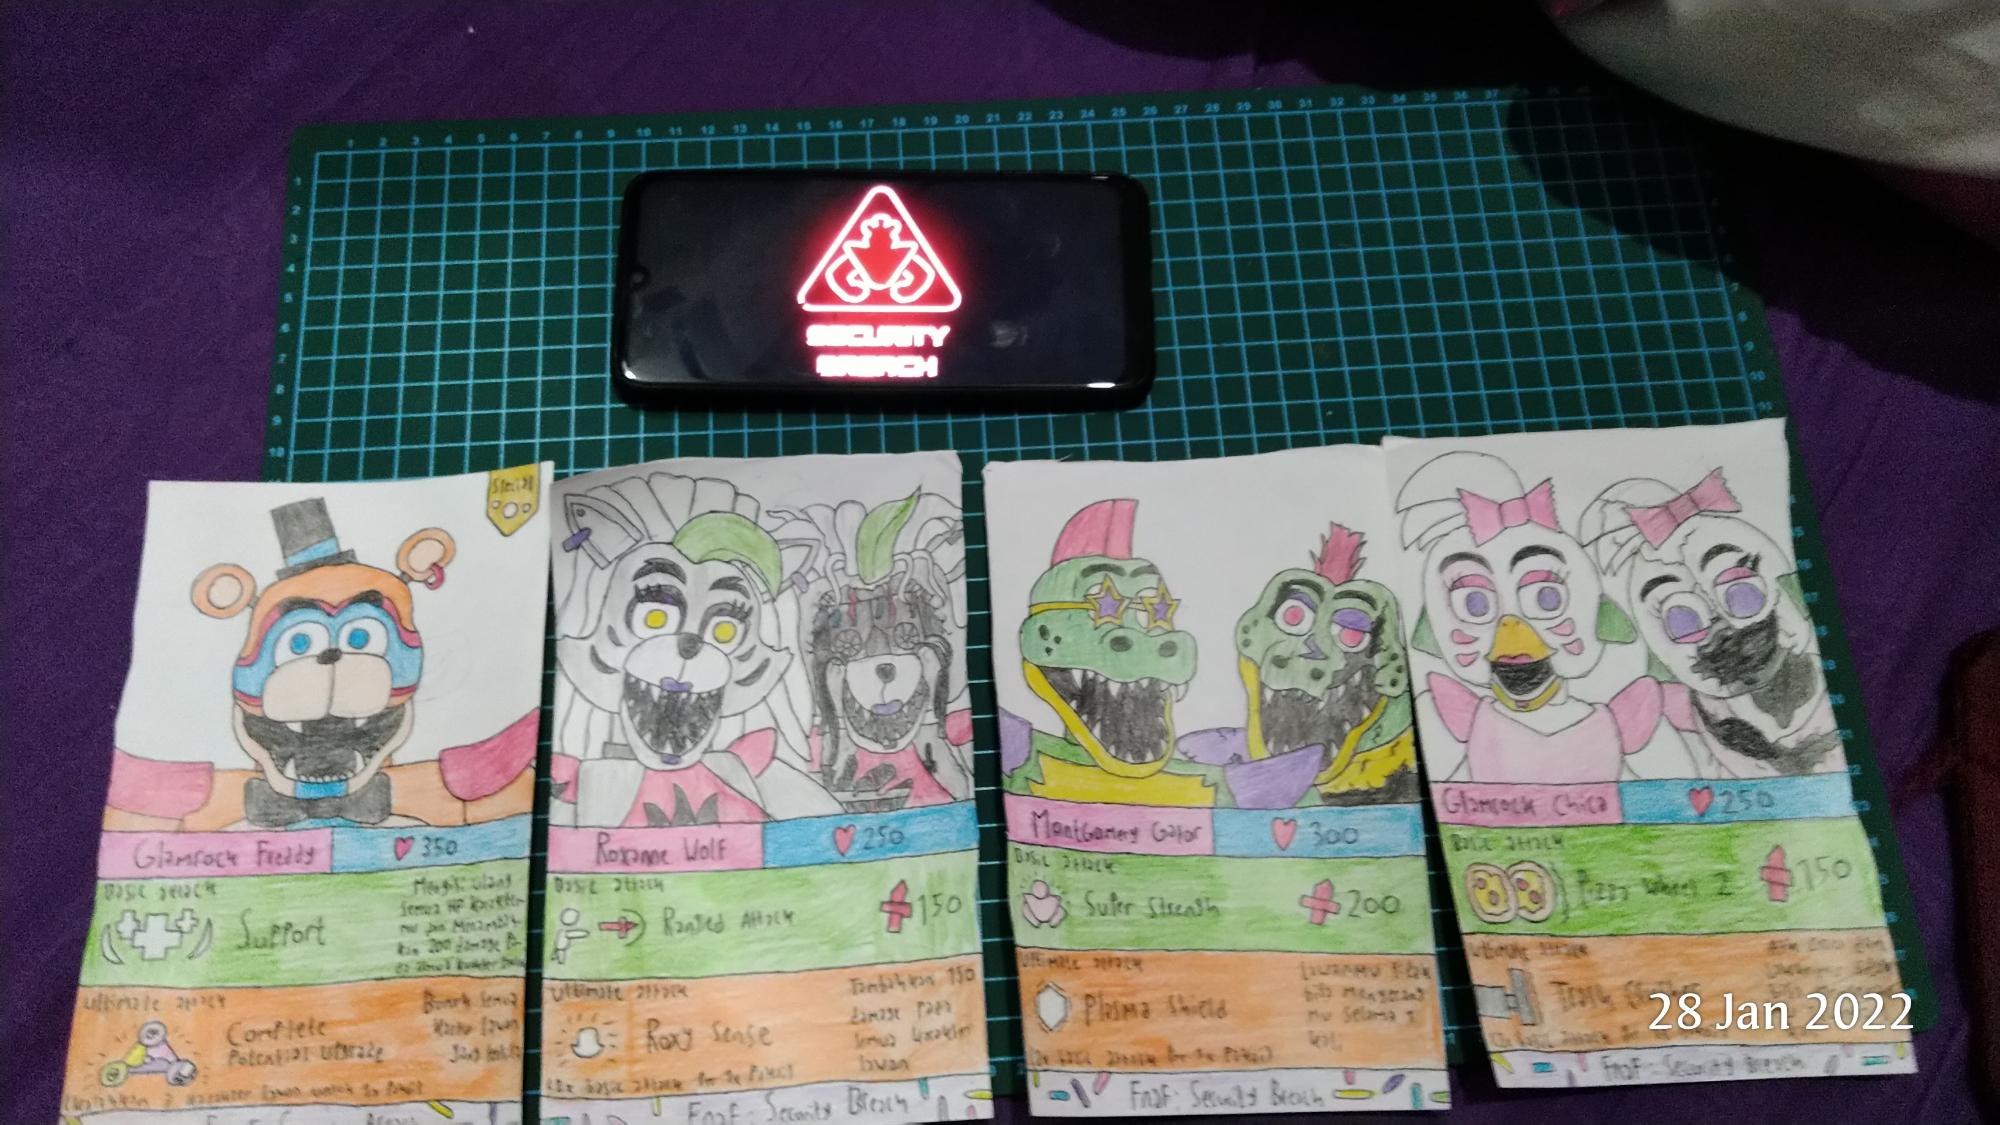 Made an Edit of what I'd like the Fnaf Security Breach Steam trading cards  to look like! Really hope we get some trading cards with this game as we  haven't with any